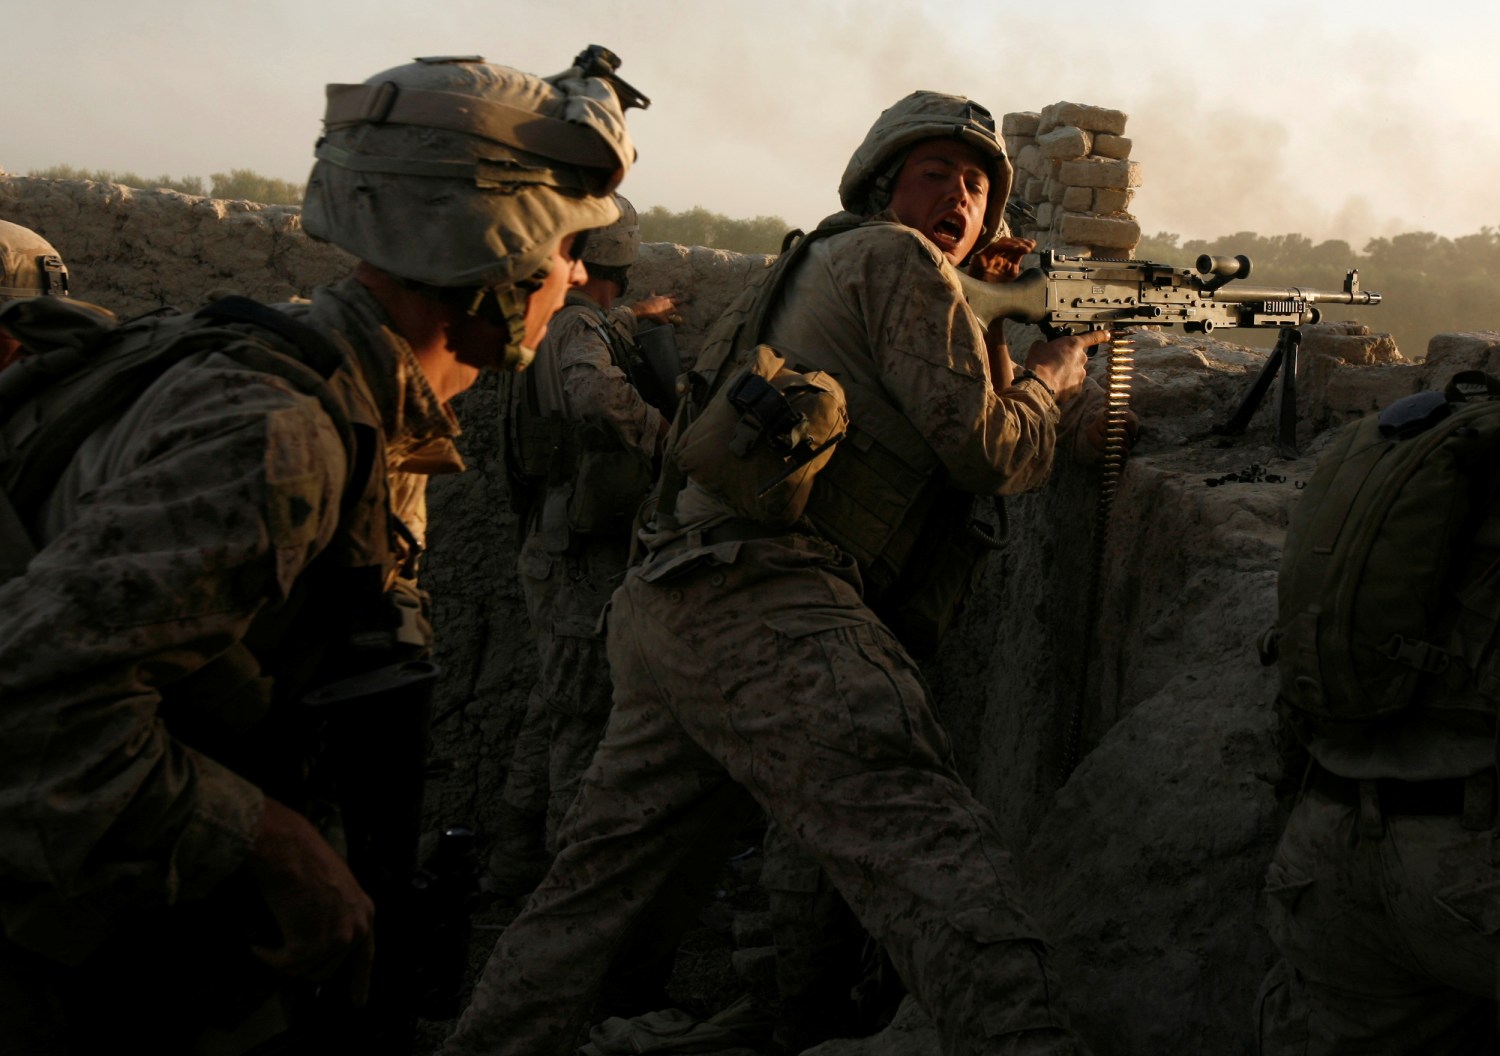 FILE PHOTO: U.S. Marines fire during a Taliban ambush as they carry out an operation to clear an area in Helmand province, Afghanistan, October 9, 2009. REUTERS/Asmaa Waguih/File Photo